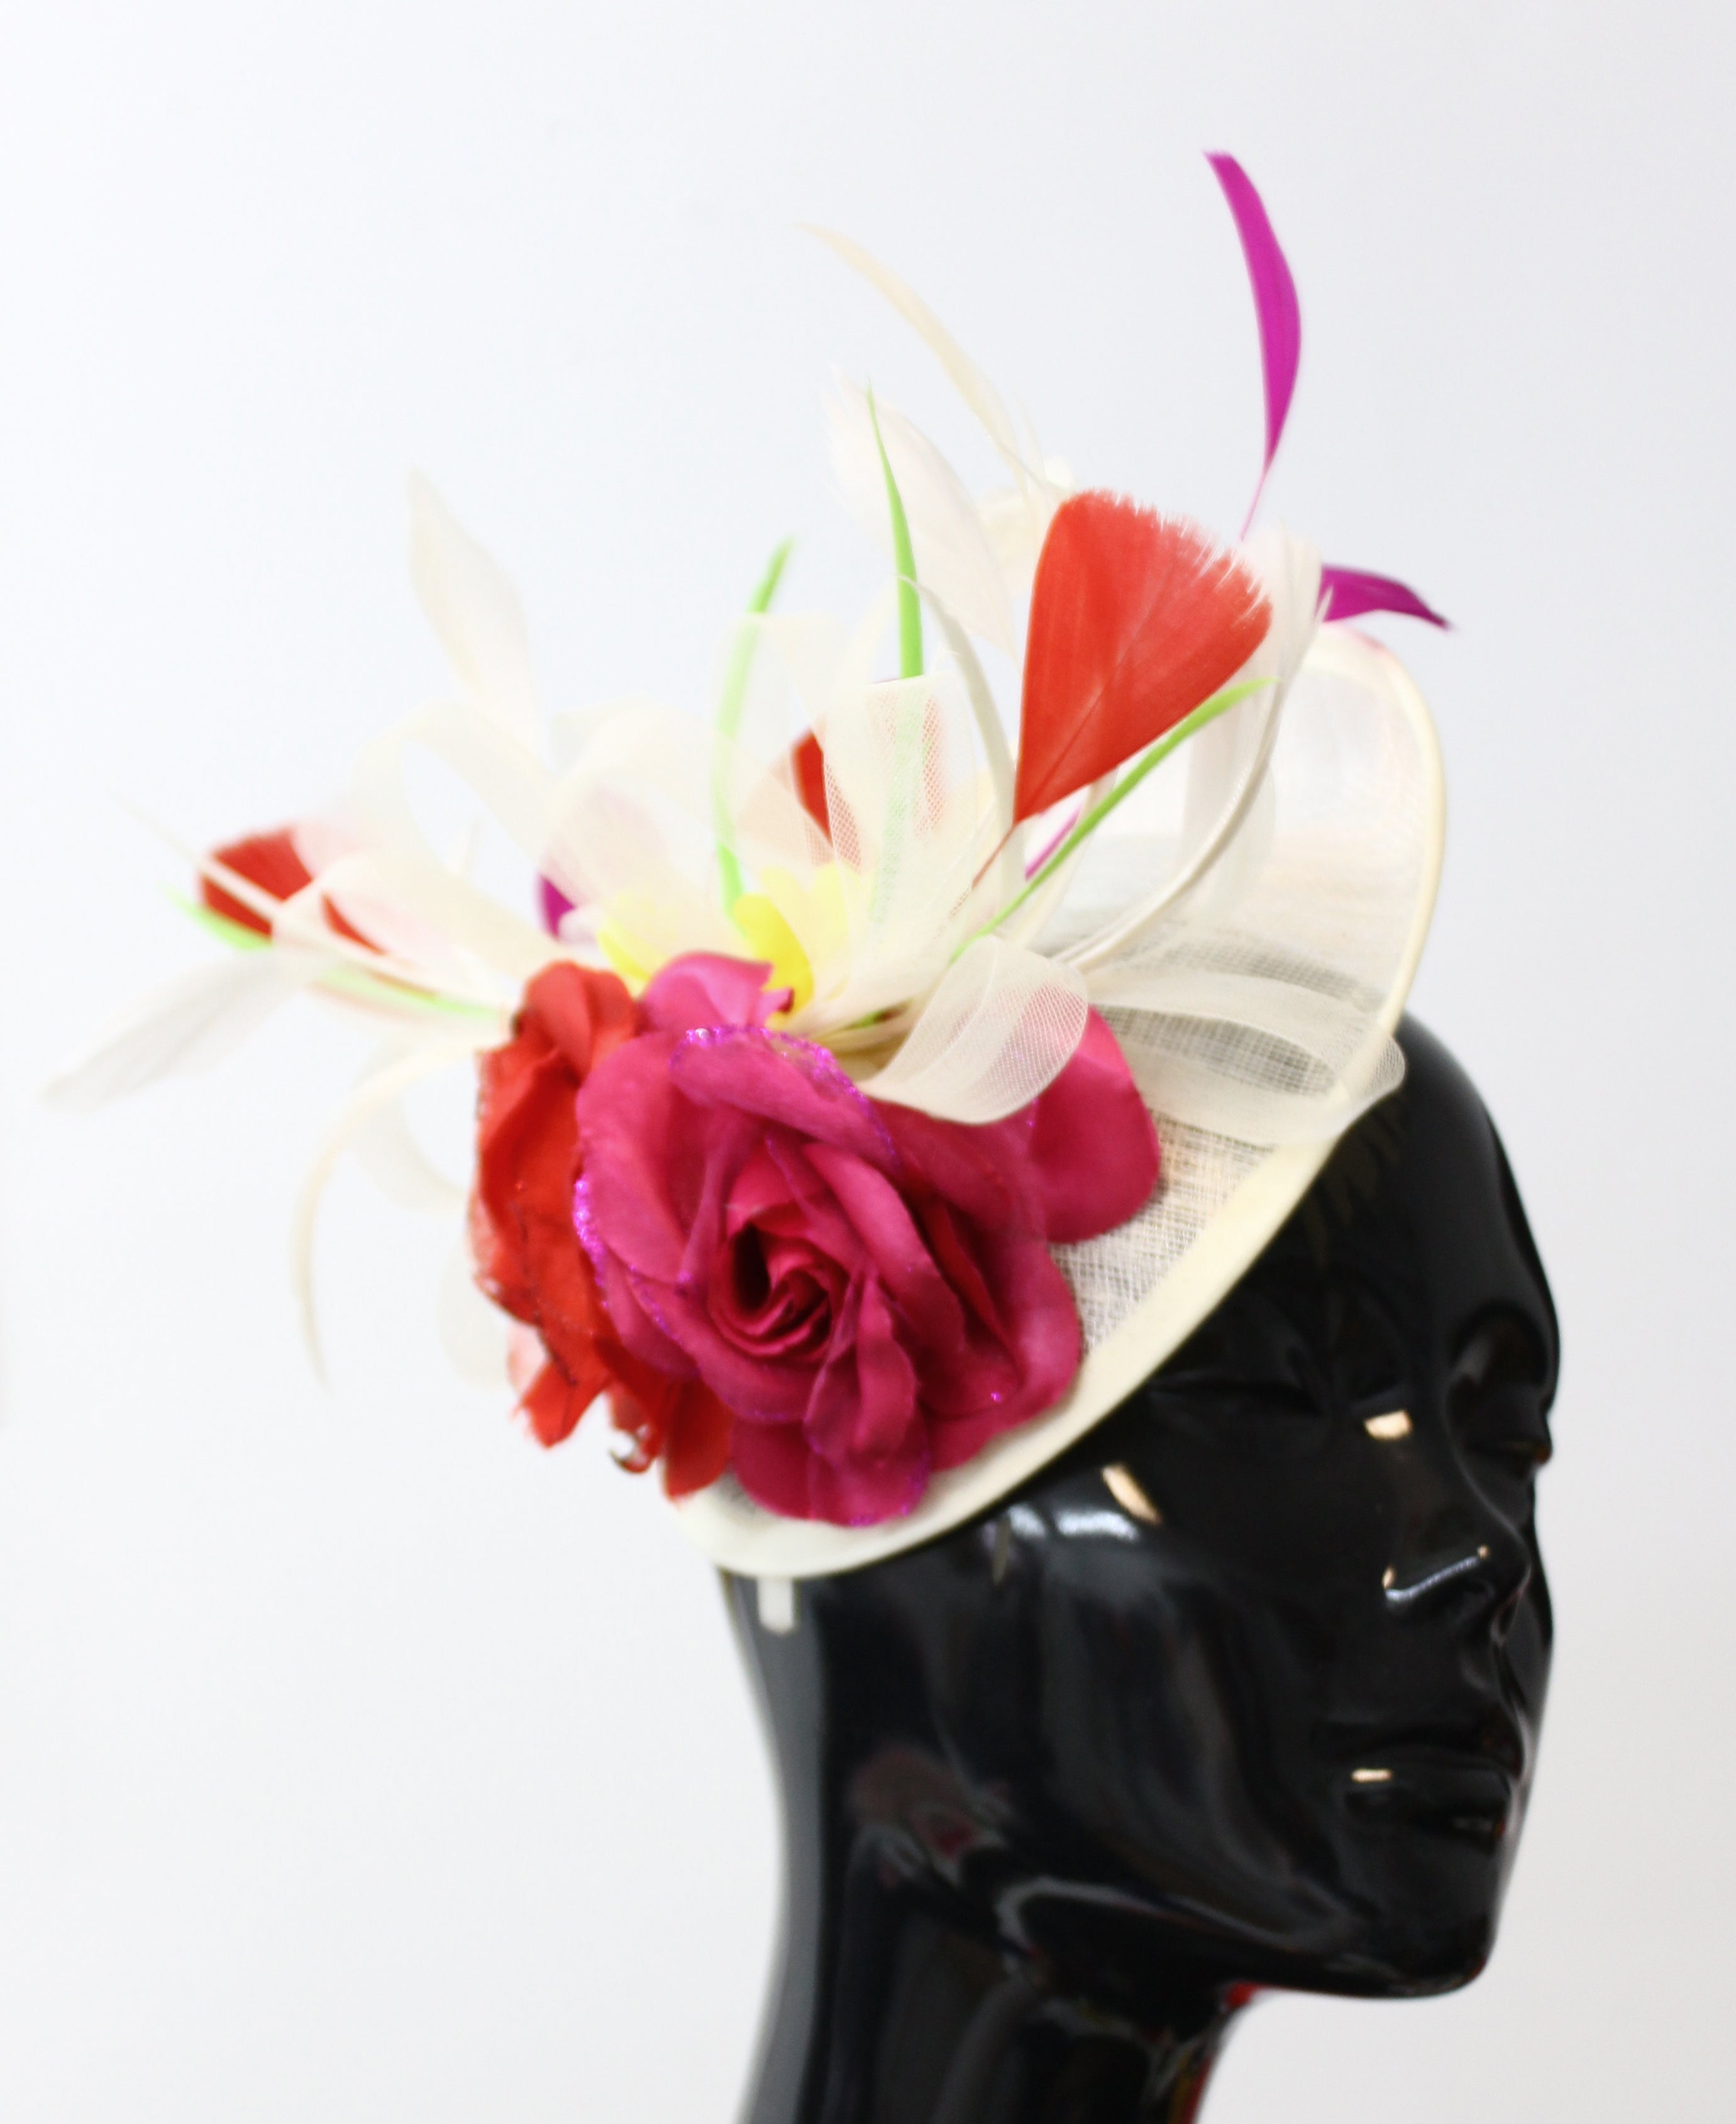 Cream Ivory Sinamay Base with Red and Fuchsia Rose Yellow Daisy and Green Feathers